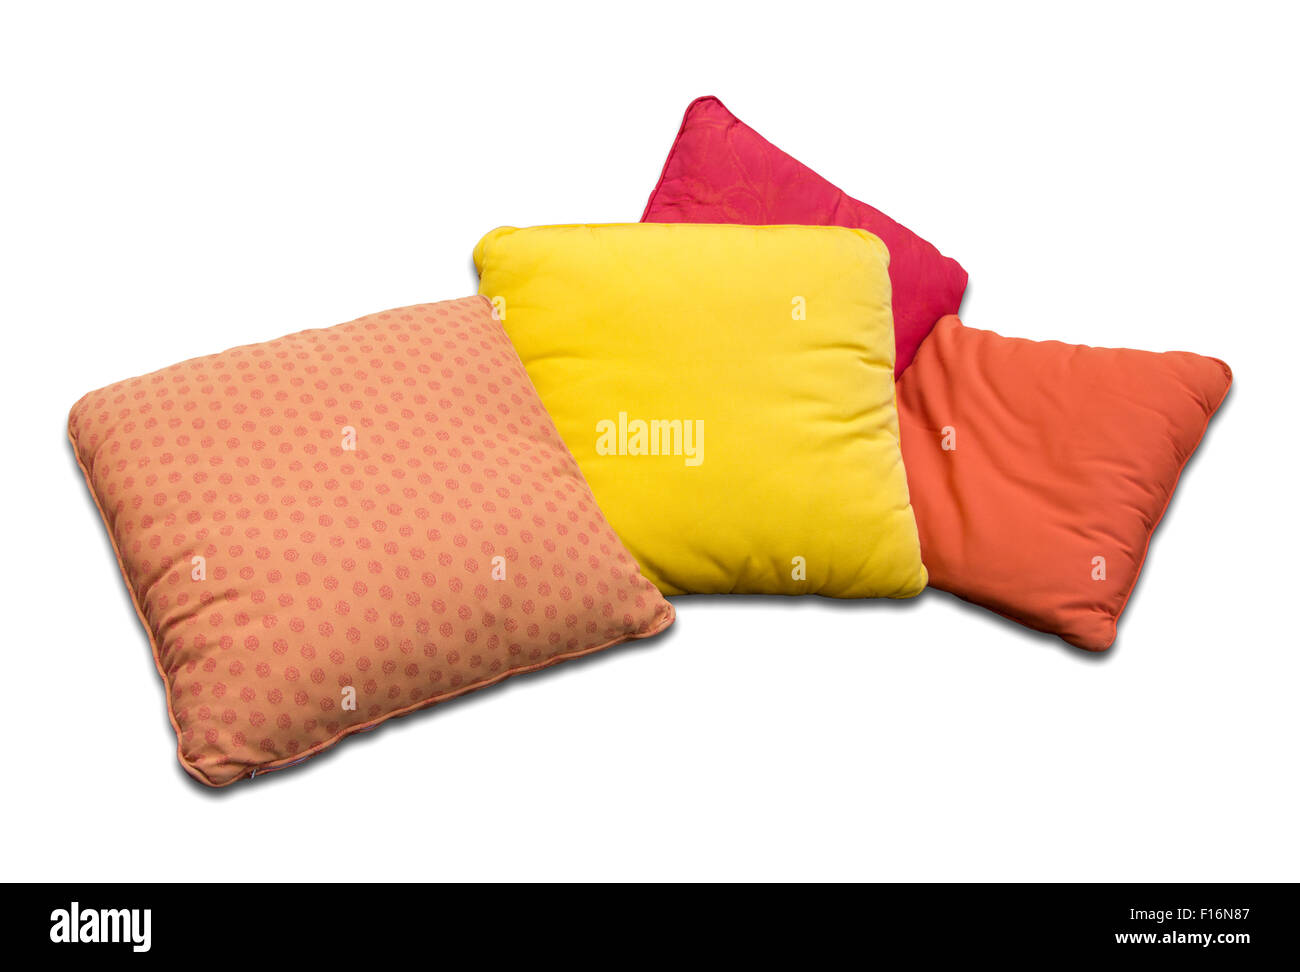 Colorful pillows isolated on white background Stock Photo